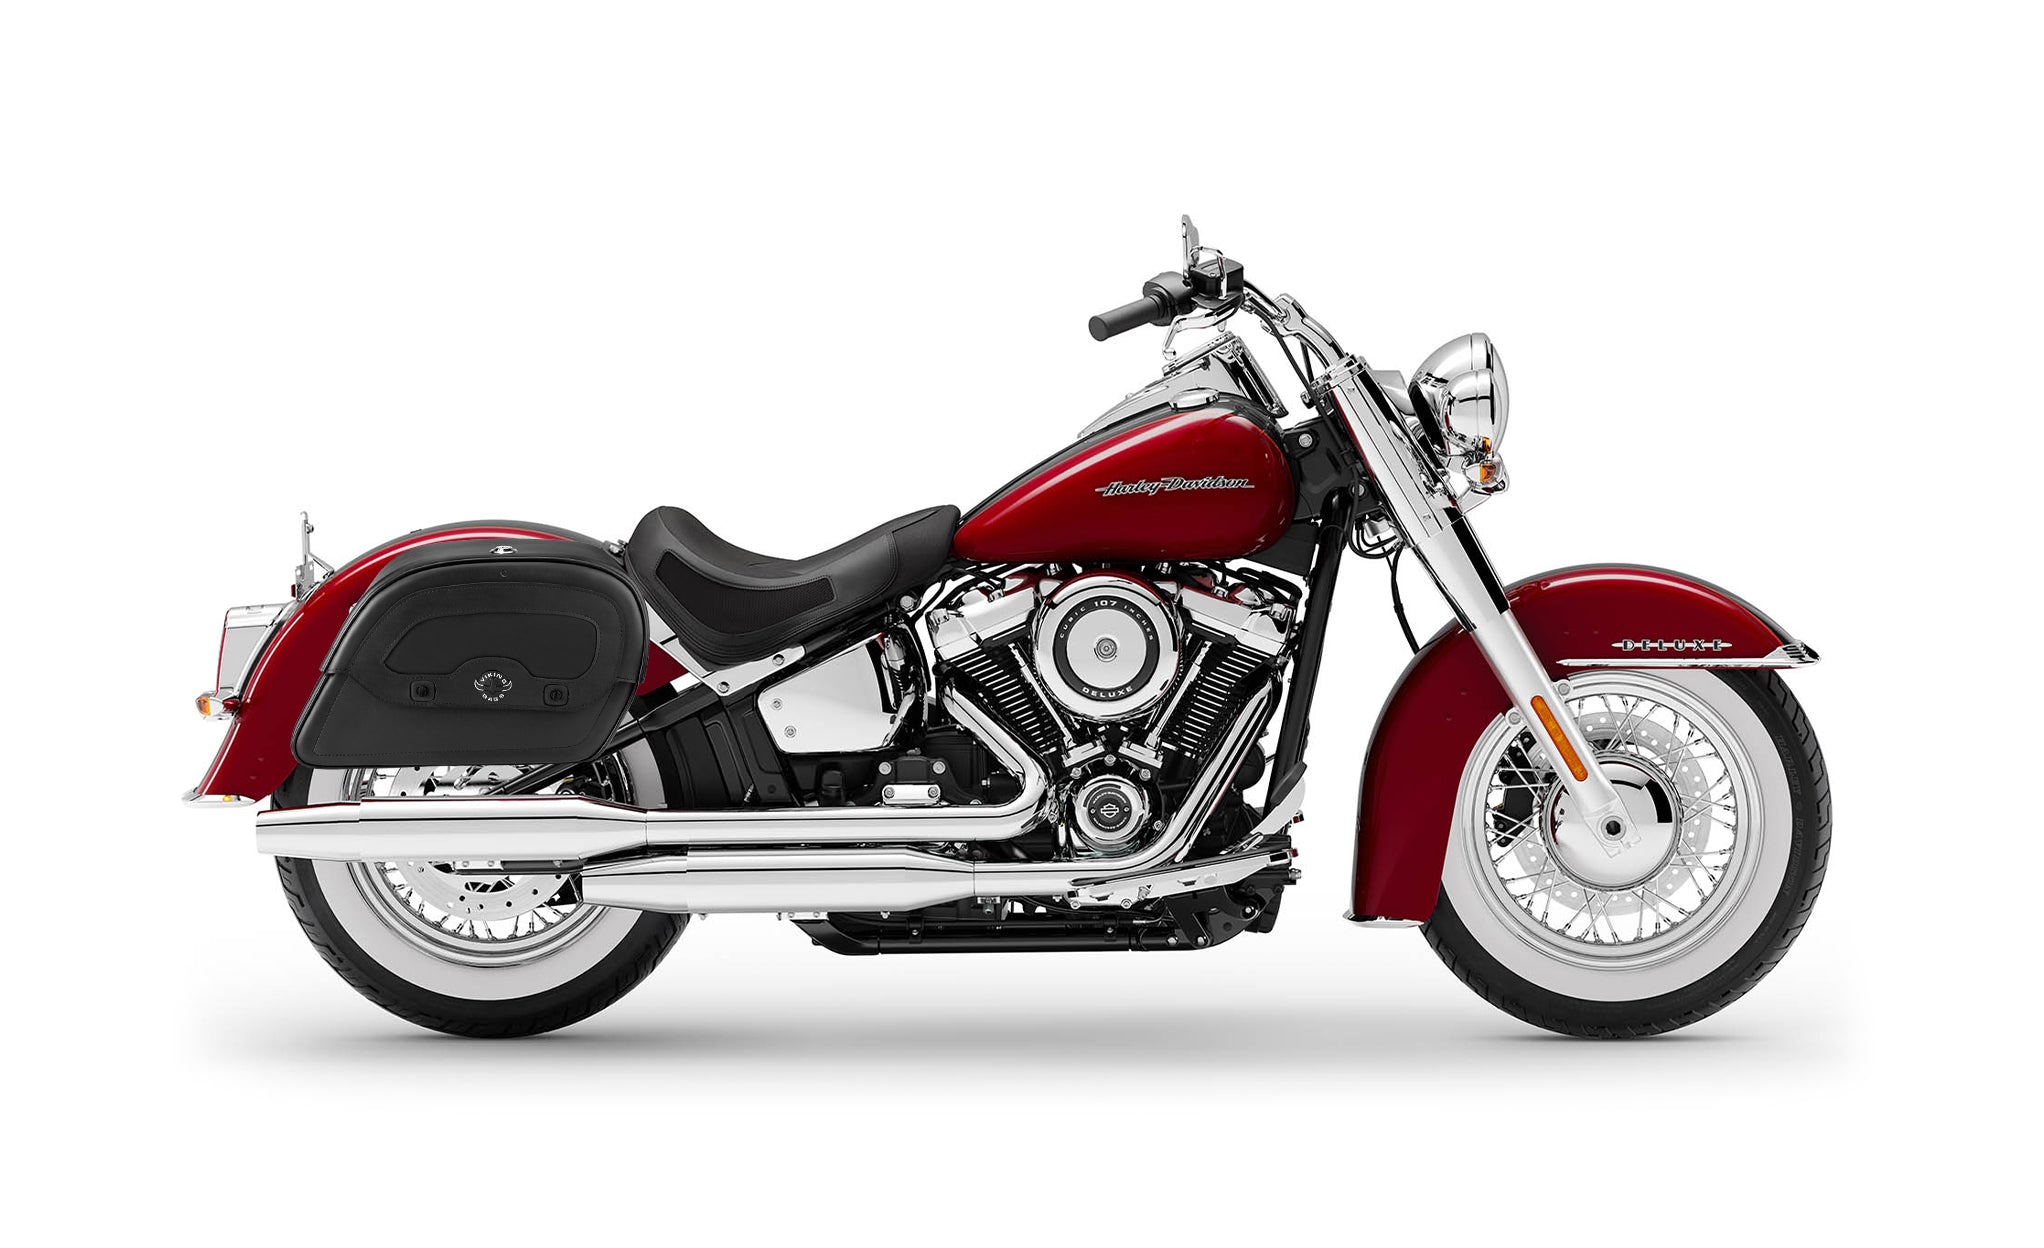 28L - Warrior Medium Quick-Mount Motorcycle Saddlebags For Harley Softail Deluxe FLDE @expand